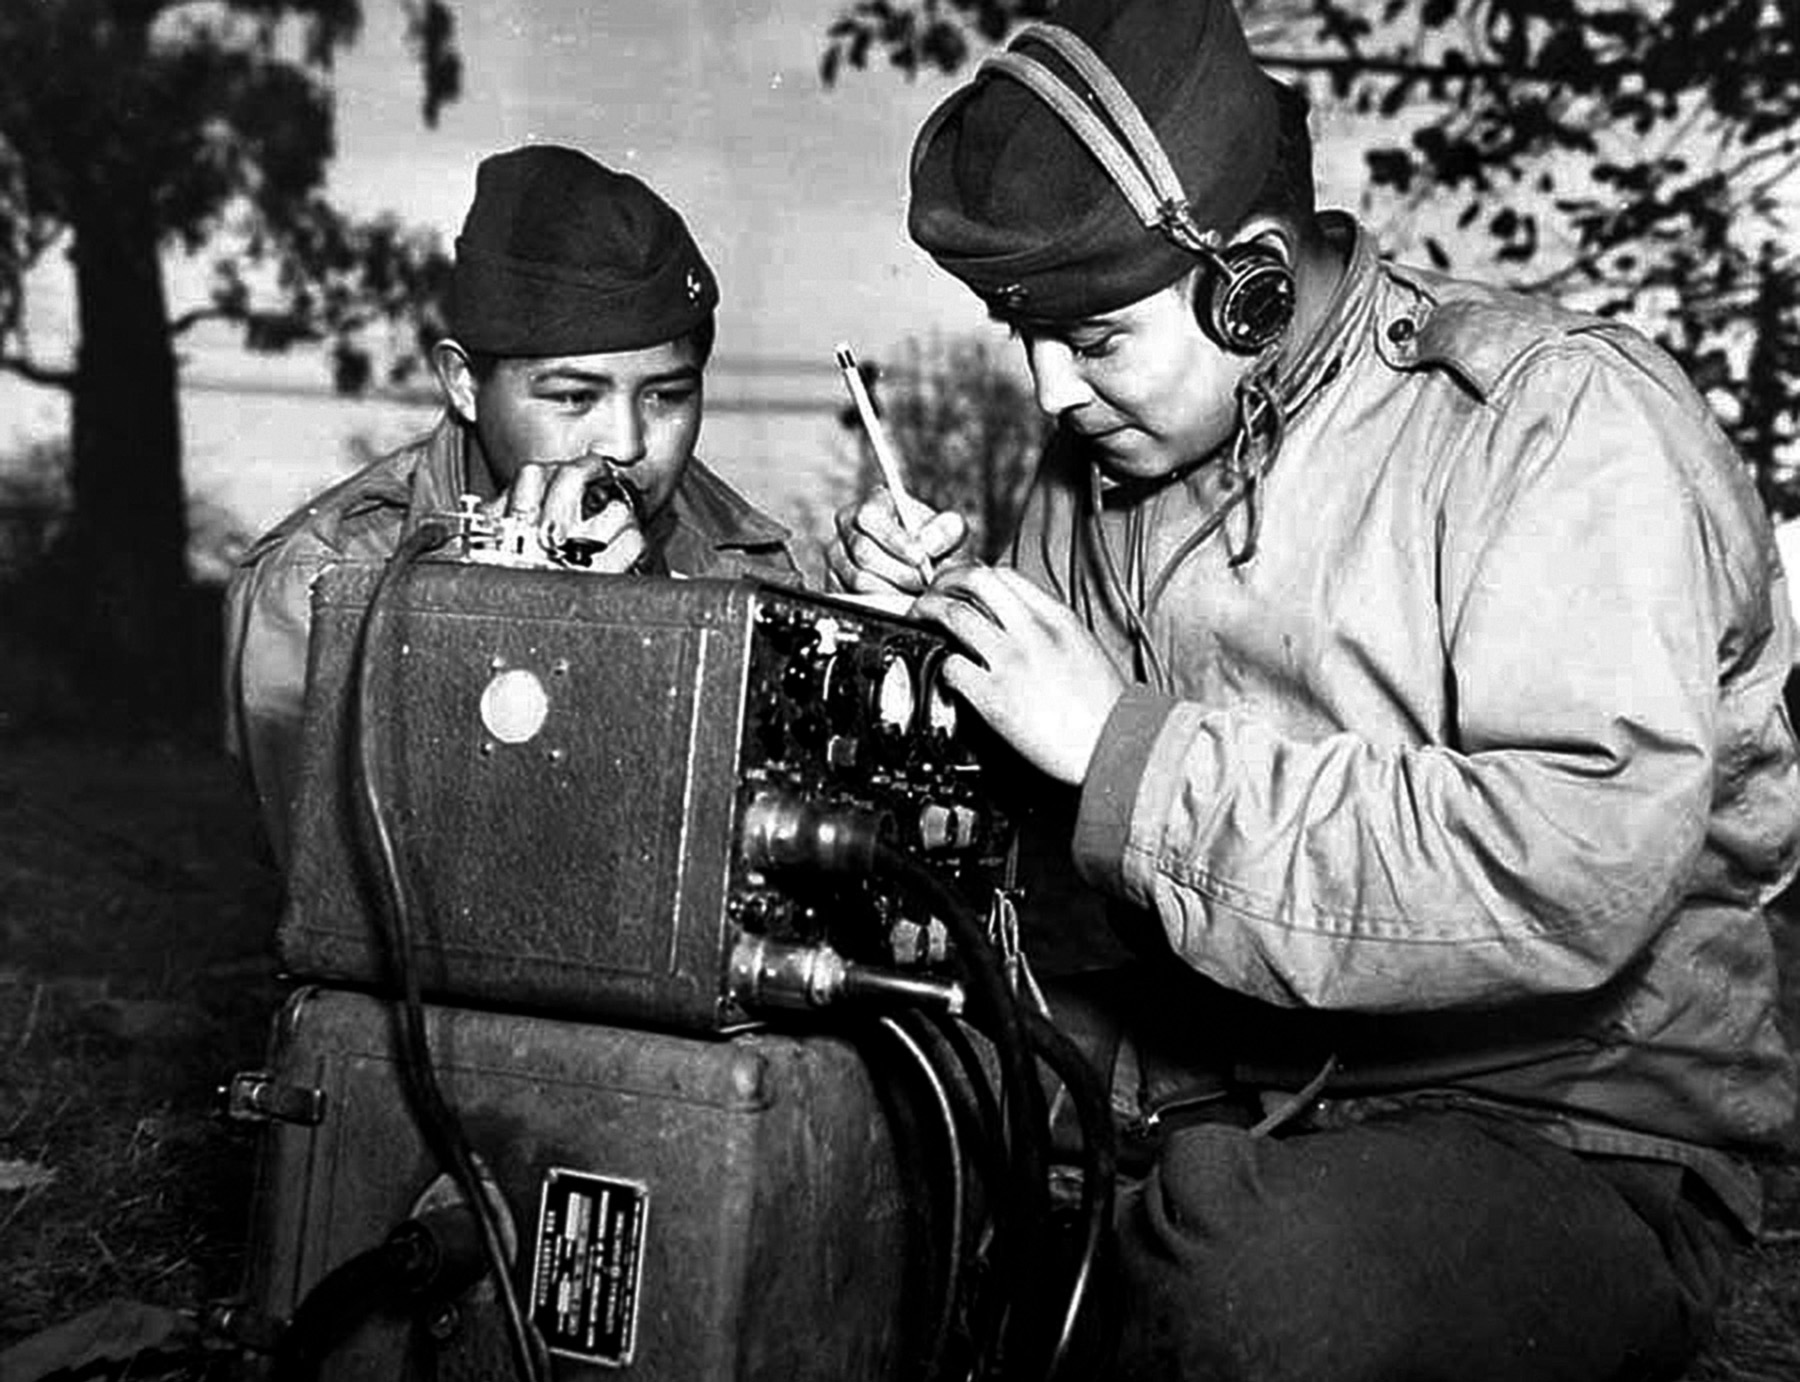 A pair of U.S. Marine code talkers is shown training with radio gear. During the fight for Betio, it’s likely their radios did not work.